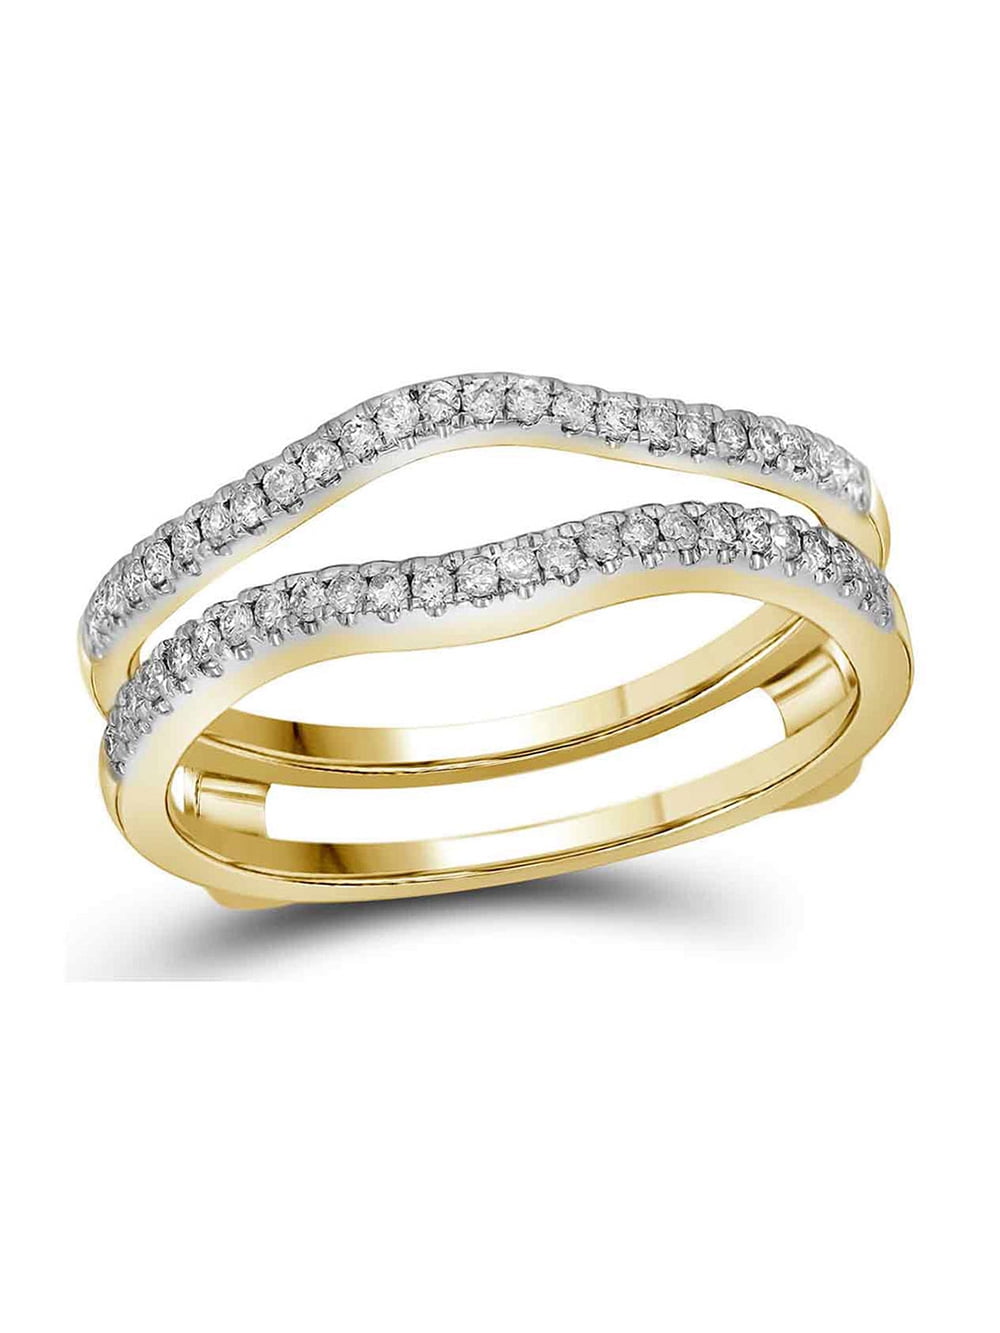 14k Yellow Gold Round Baguette Diamond Ring Guard Wrap Solitaire Enhancer  .52 CT by RG&D